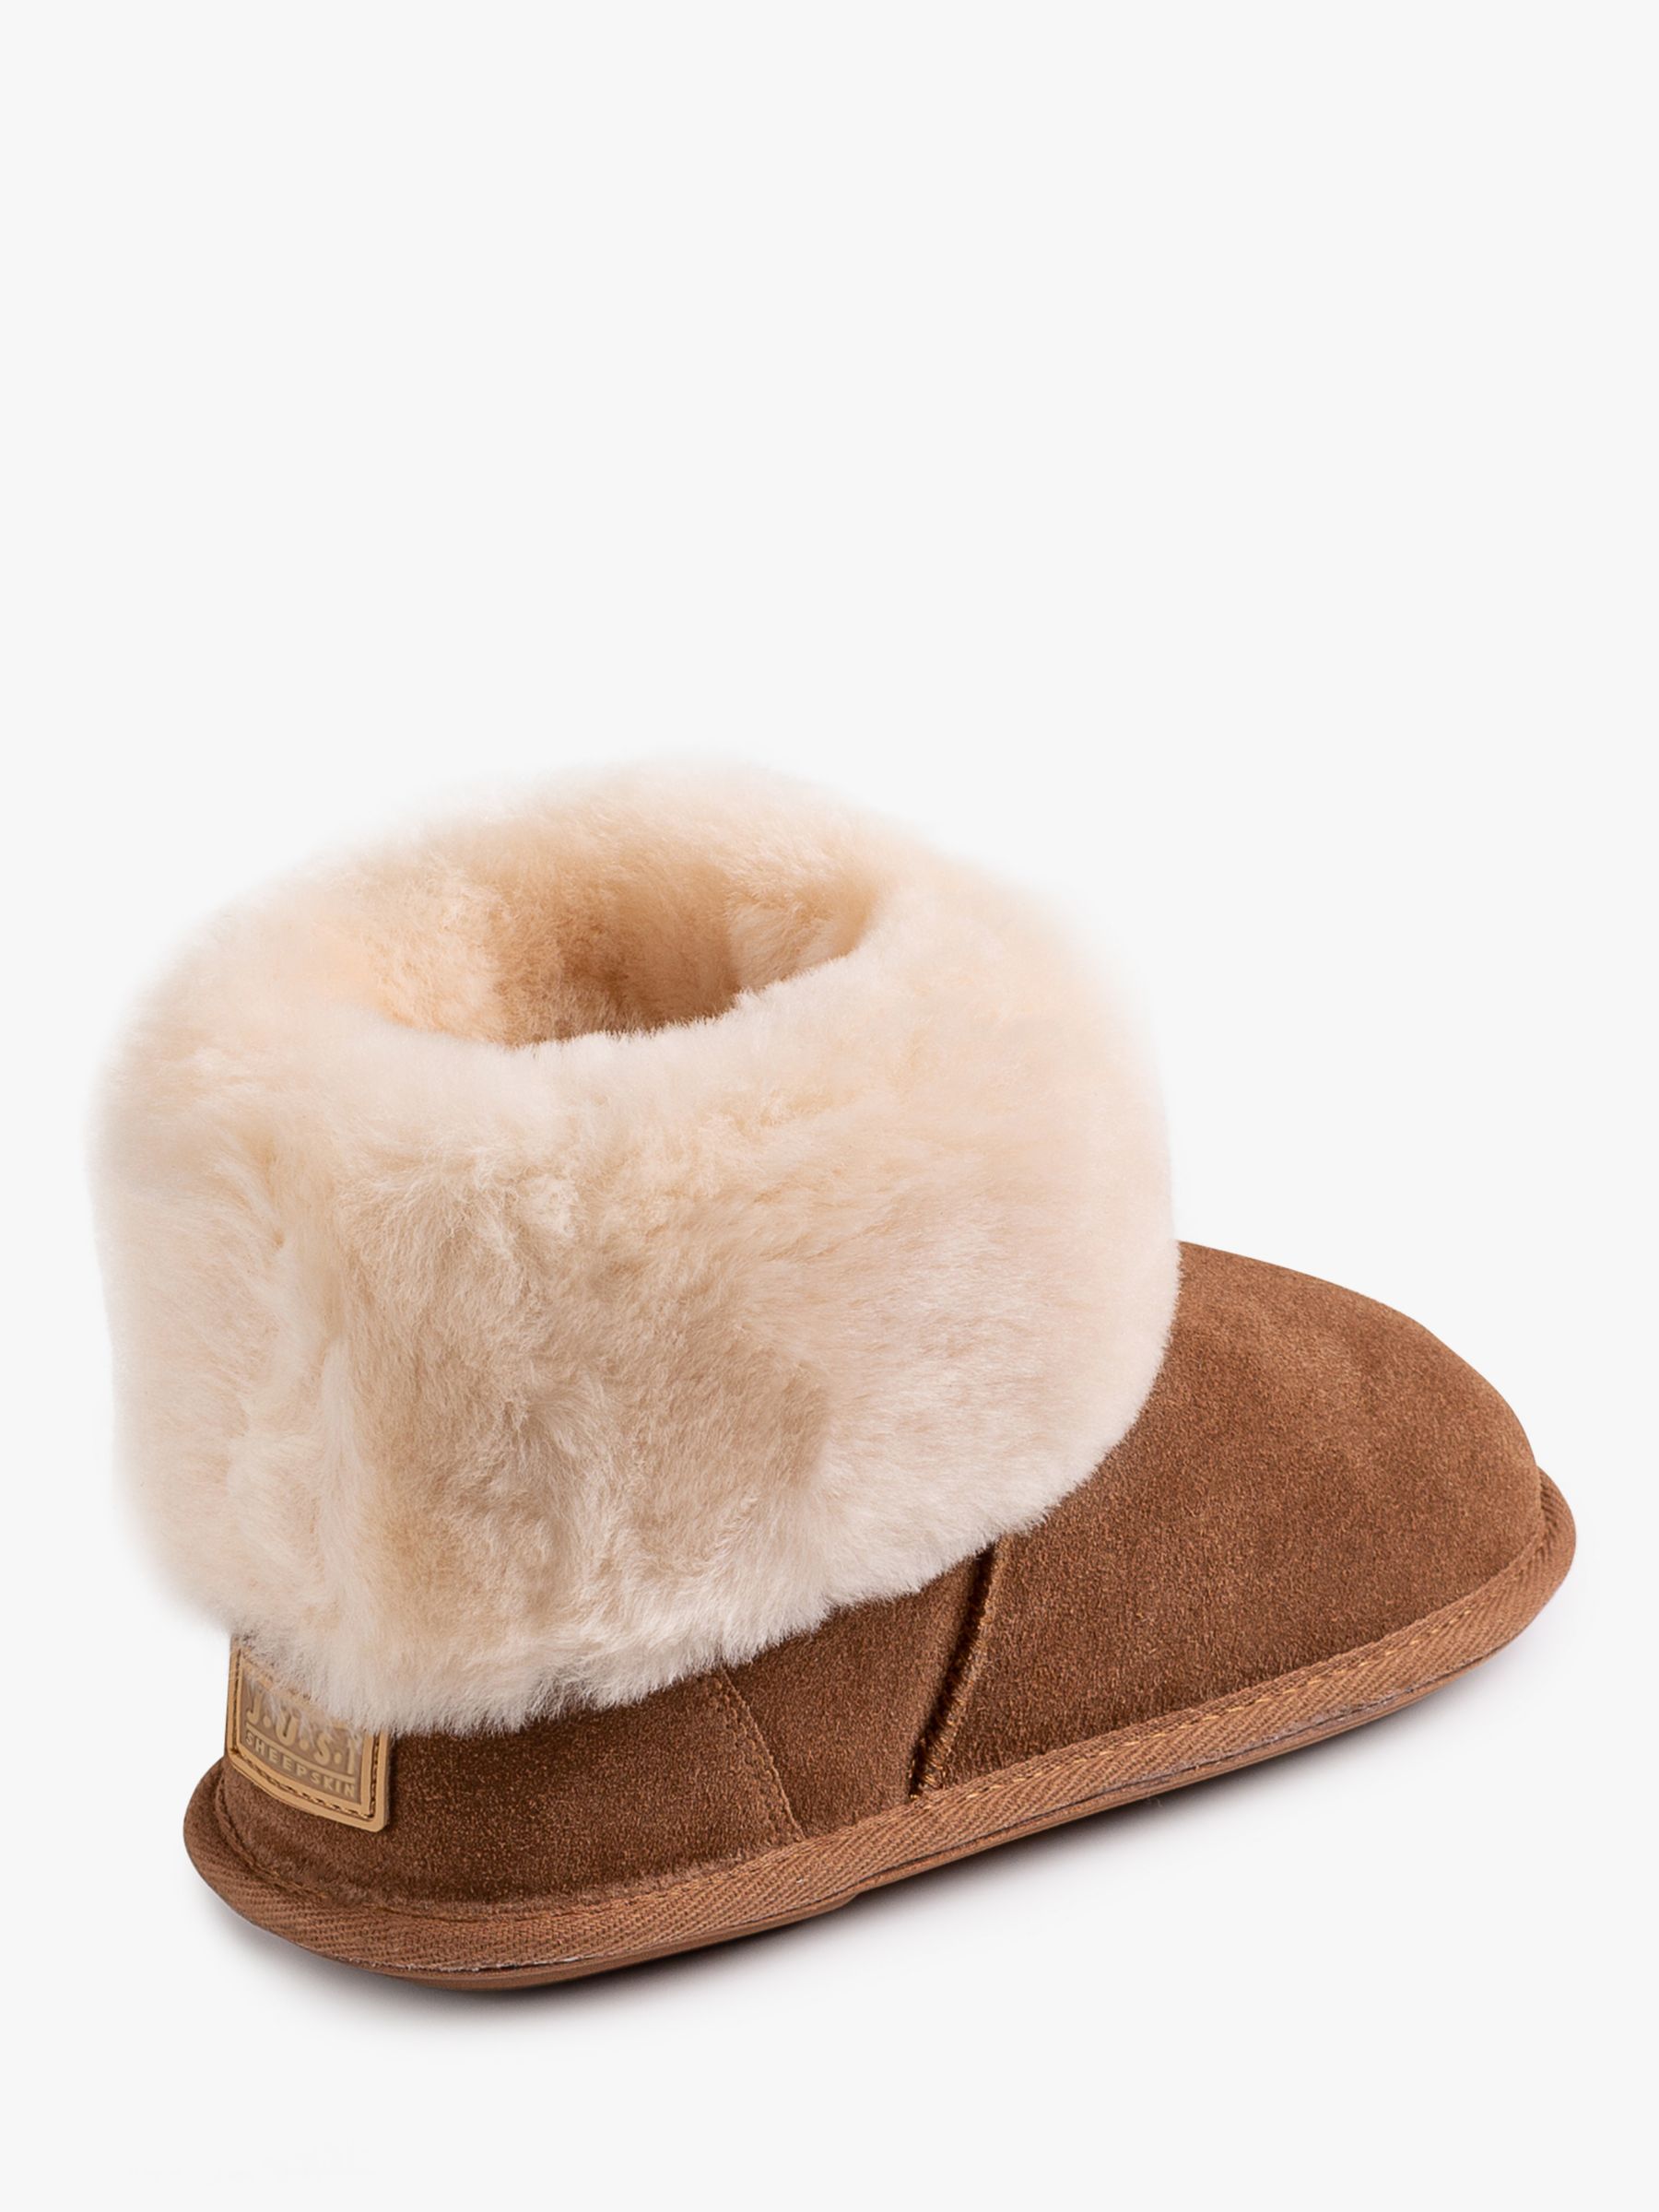 Buy Just Sheepskin Albery Suede Slipper Boots Online at johnlewis.com